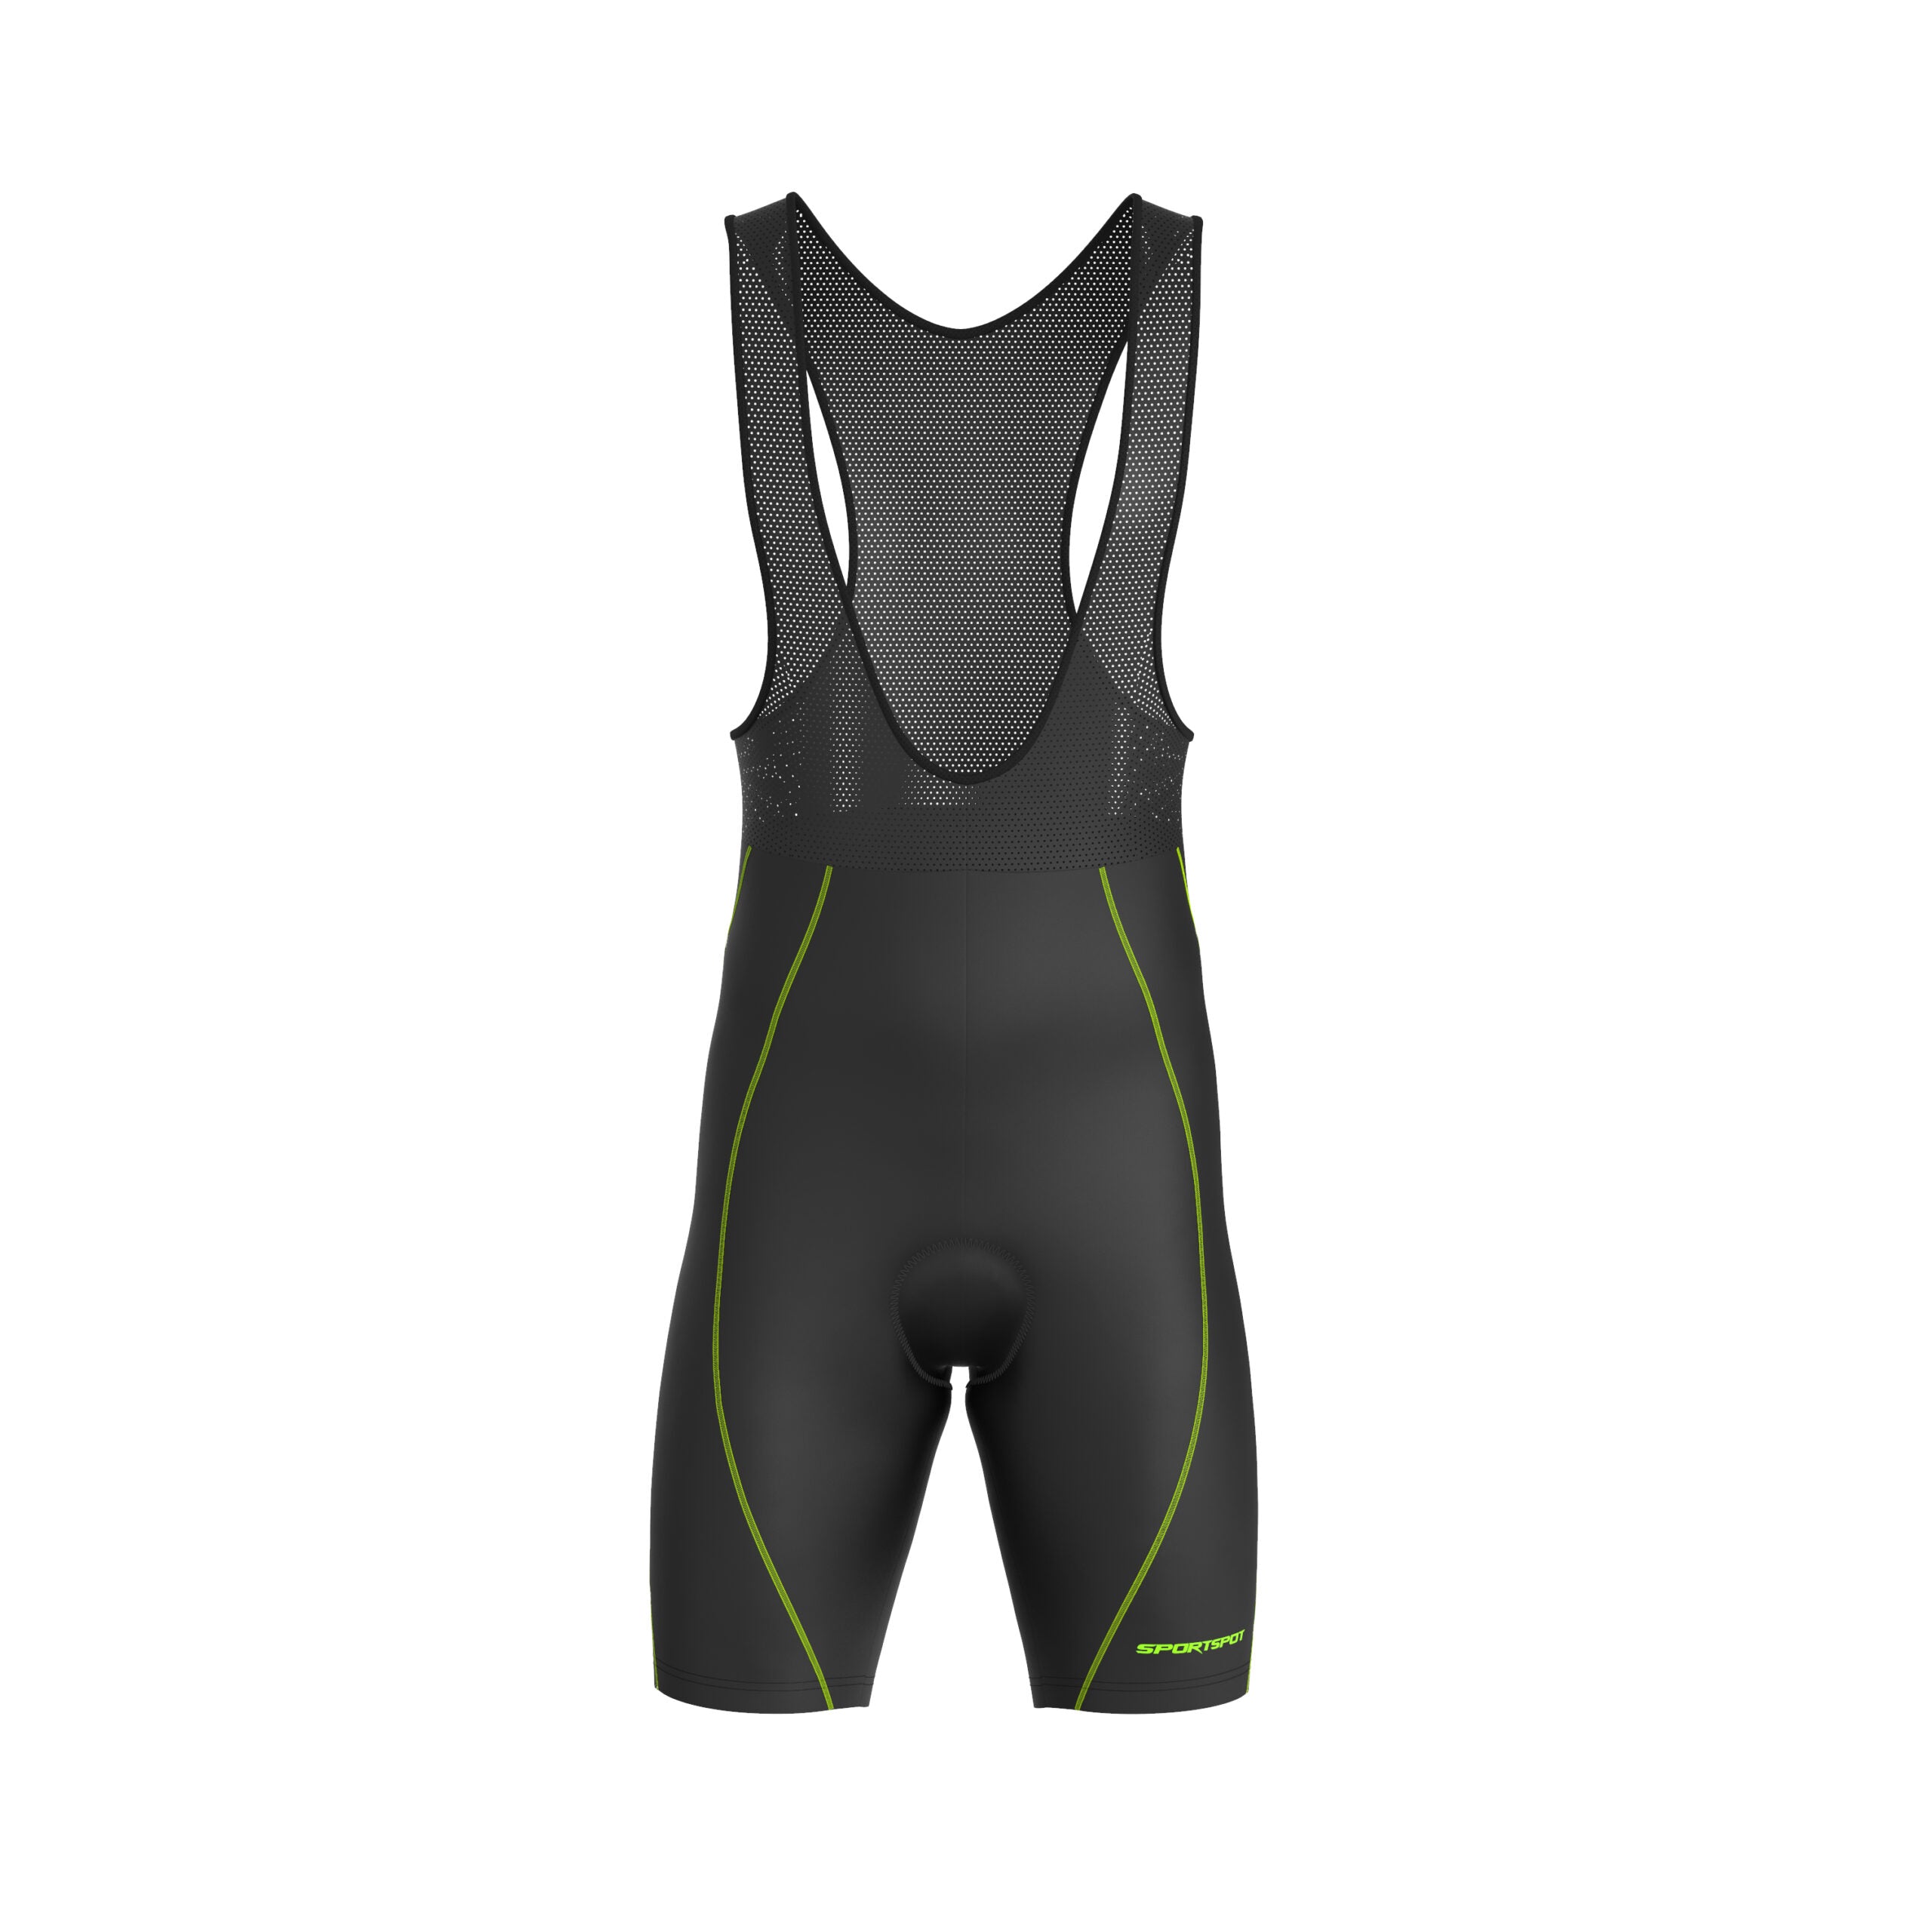 fluorescent green cycling bib shorts with mesh upper